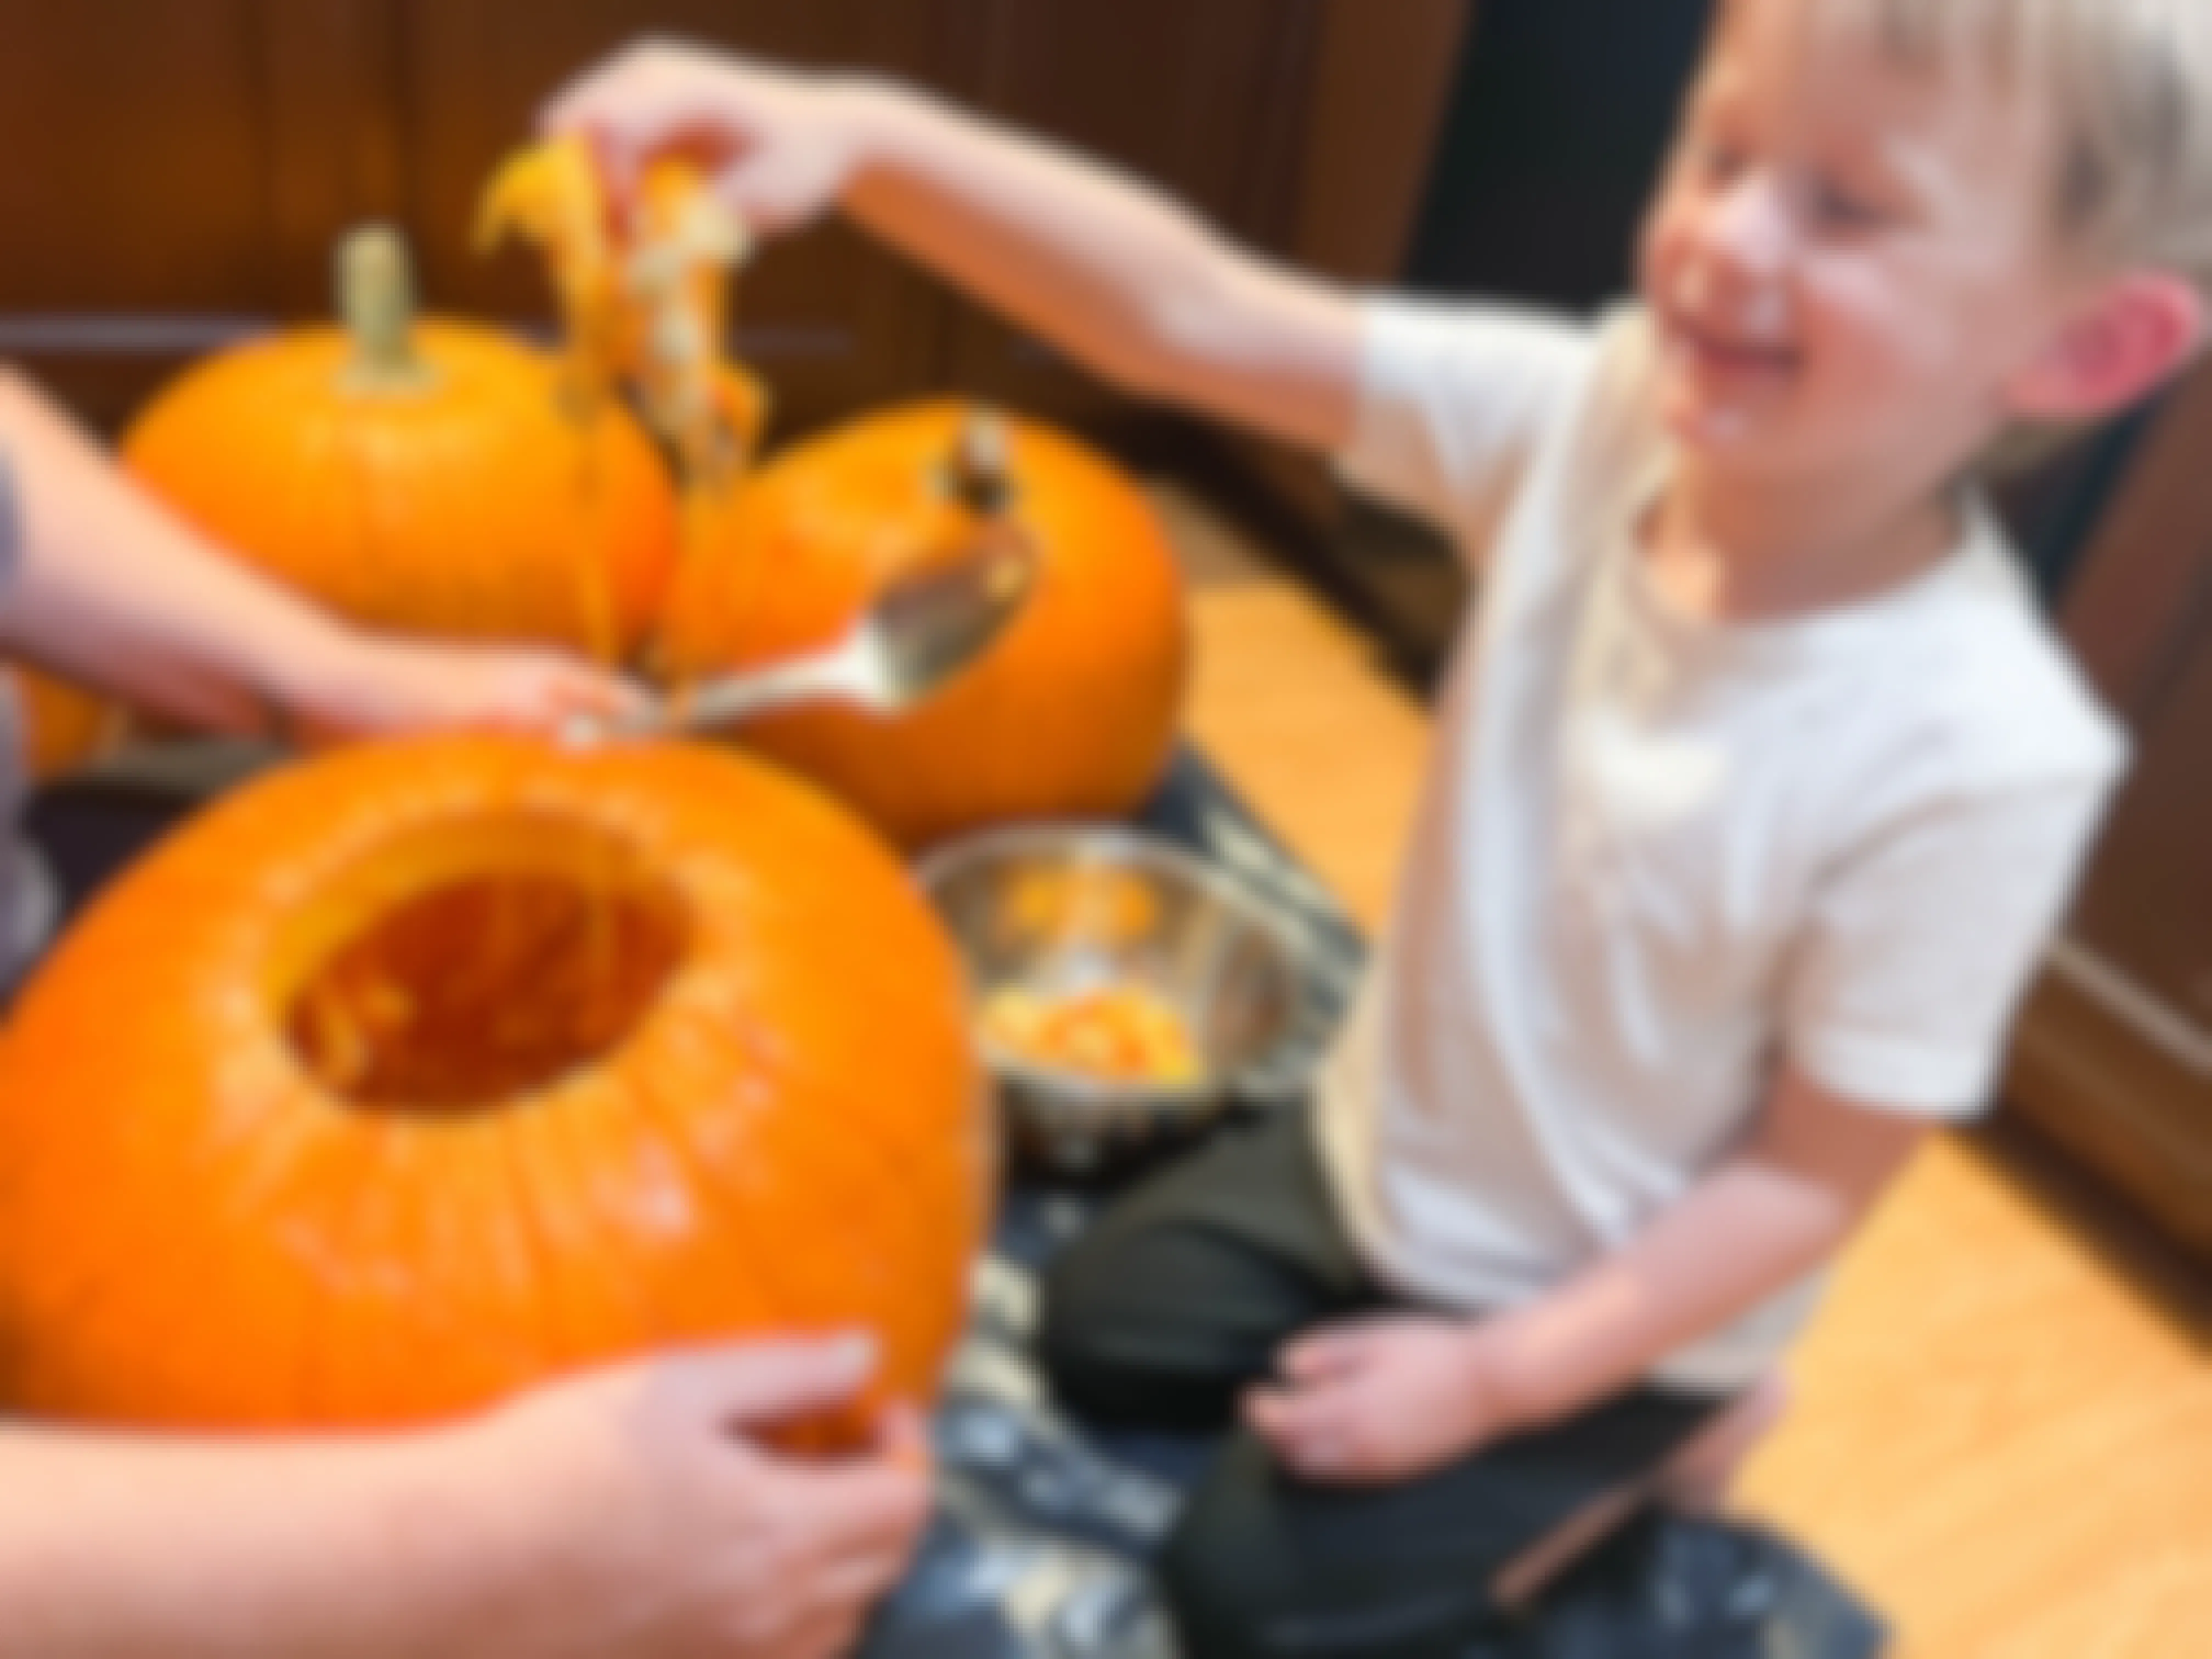 How to Carve a Pumpkin Like a Pro in 4 Easy Steps